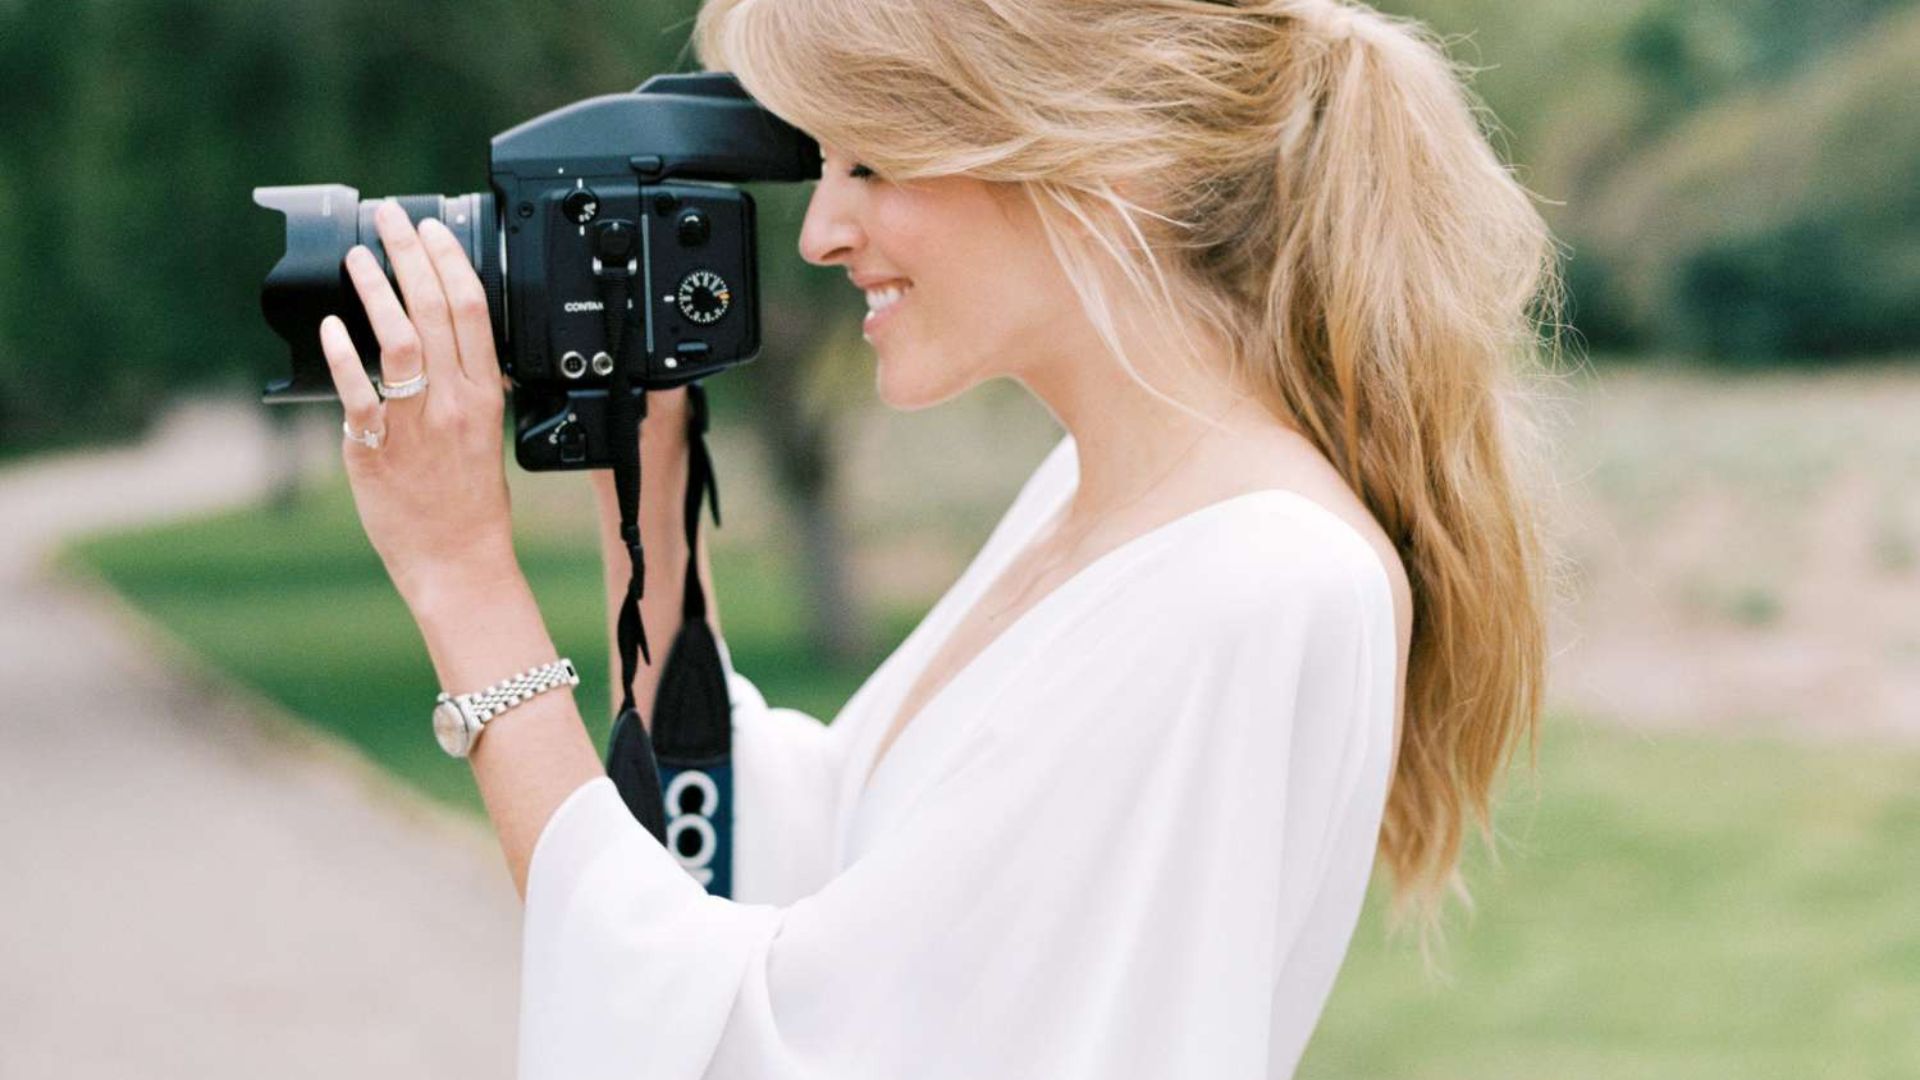 a lady wearing a white blouse taking a photography showing pgotography genres